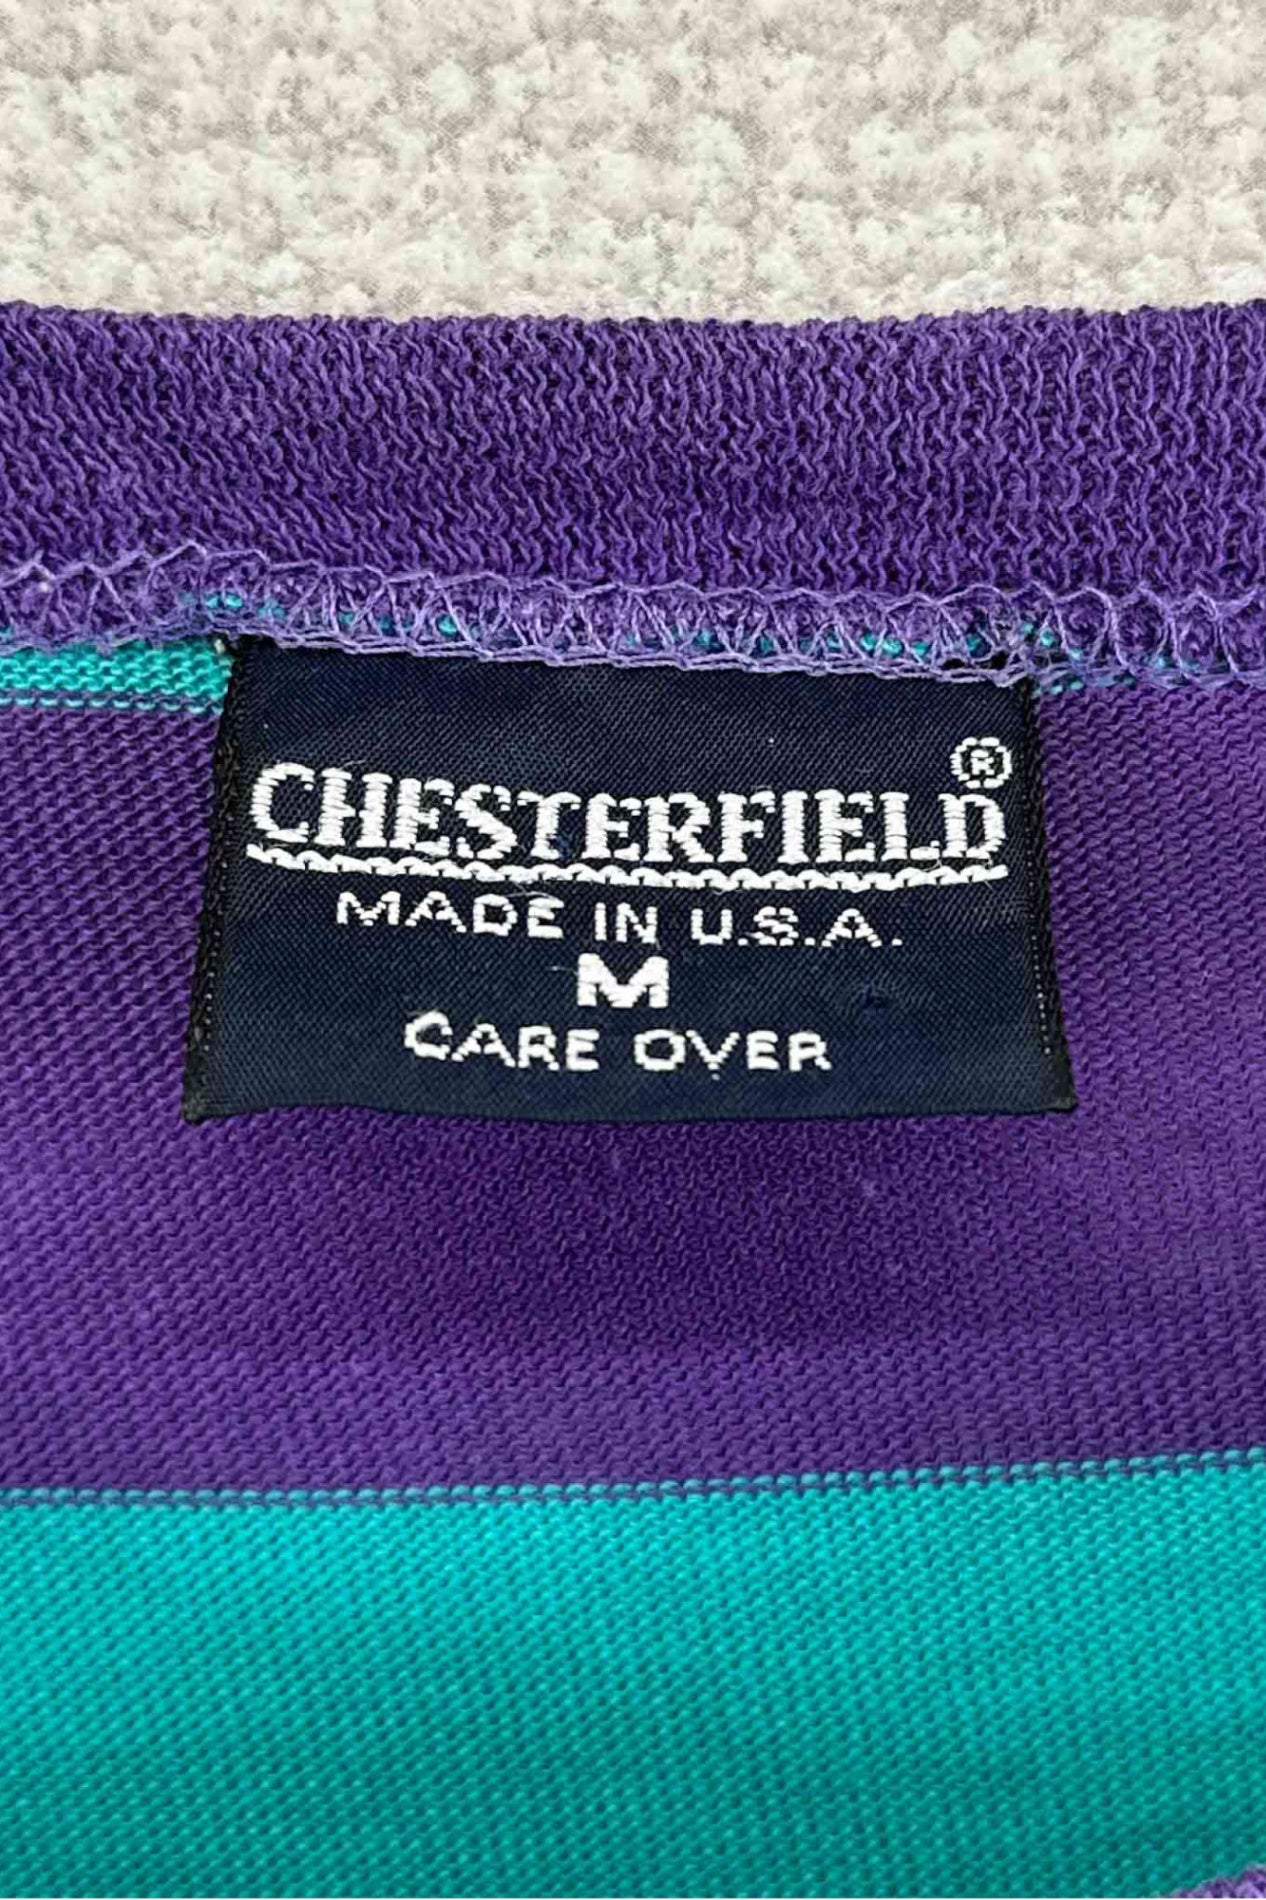 Made in USA CHESTERFIELD border T-shirt